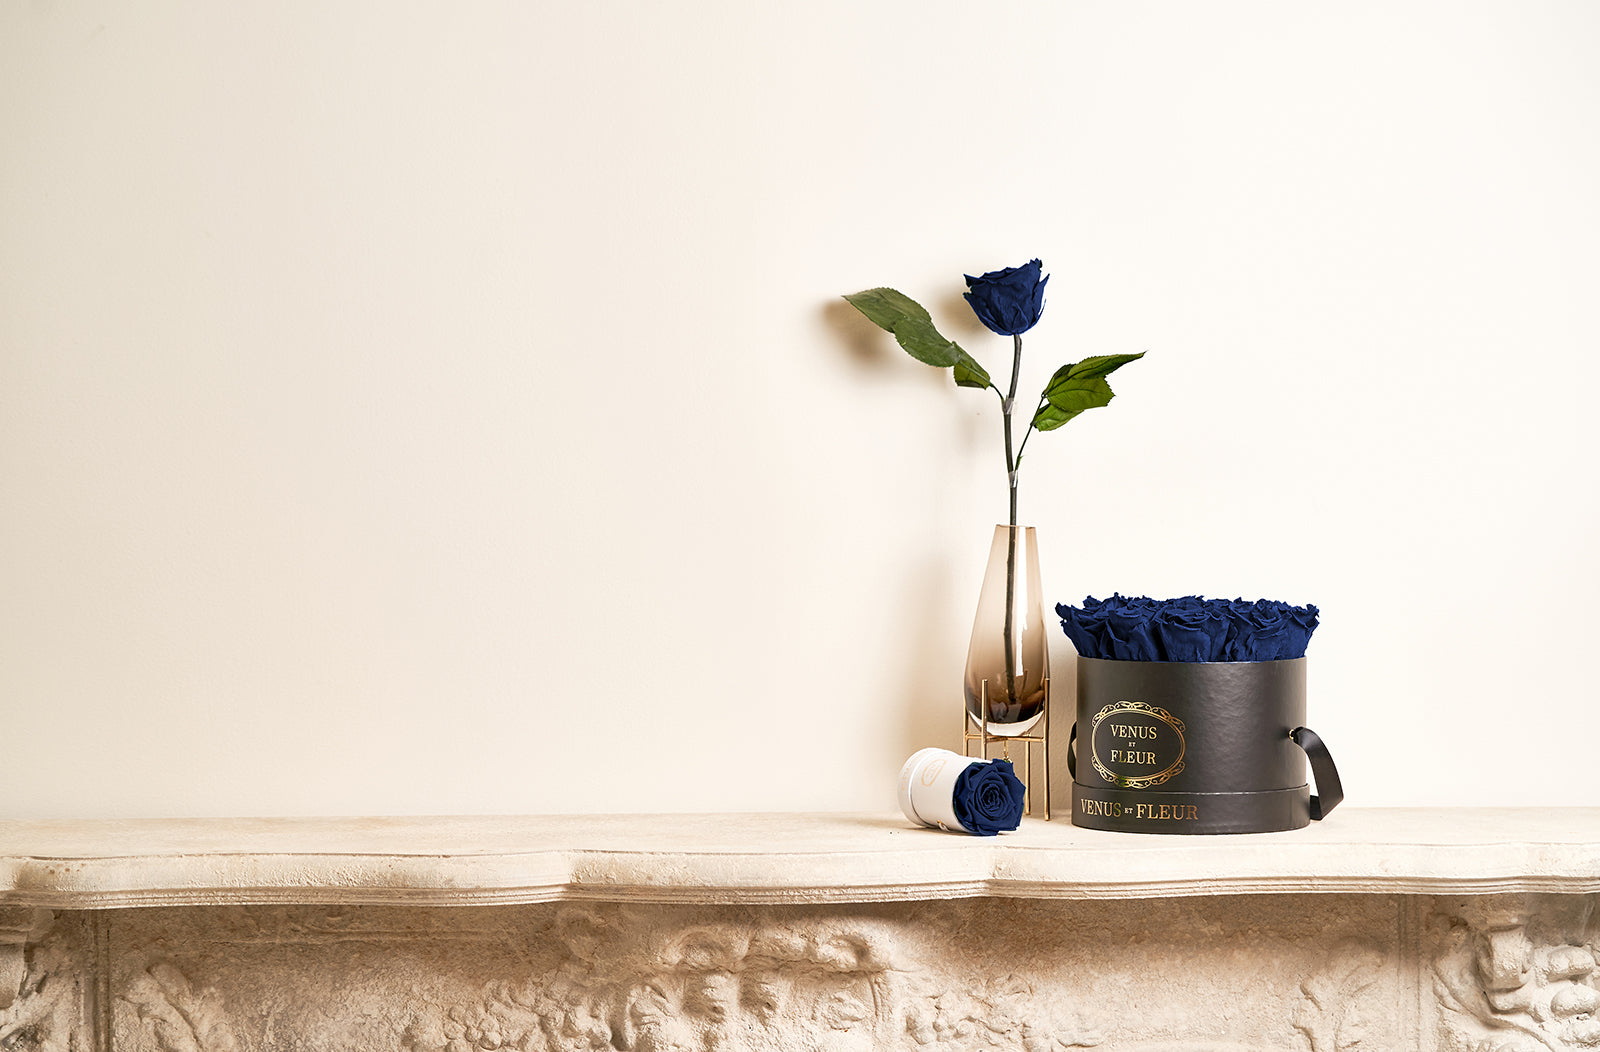 A vase with a single-stemmed dark blue rose and two flower box arrangements